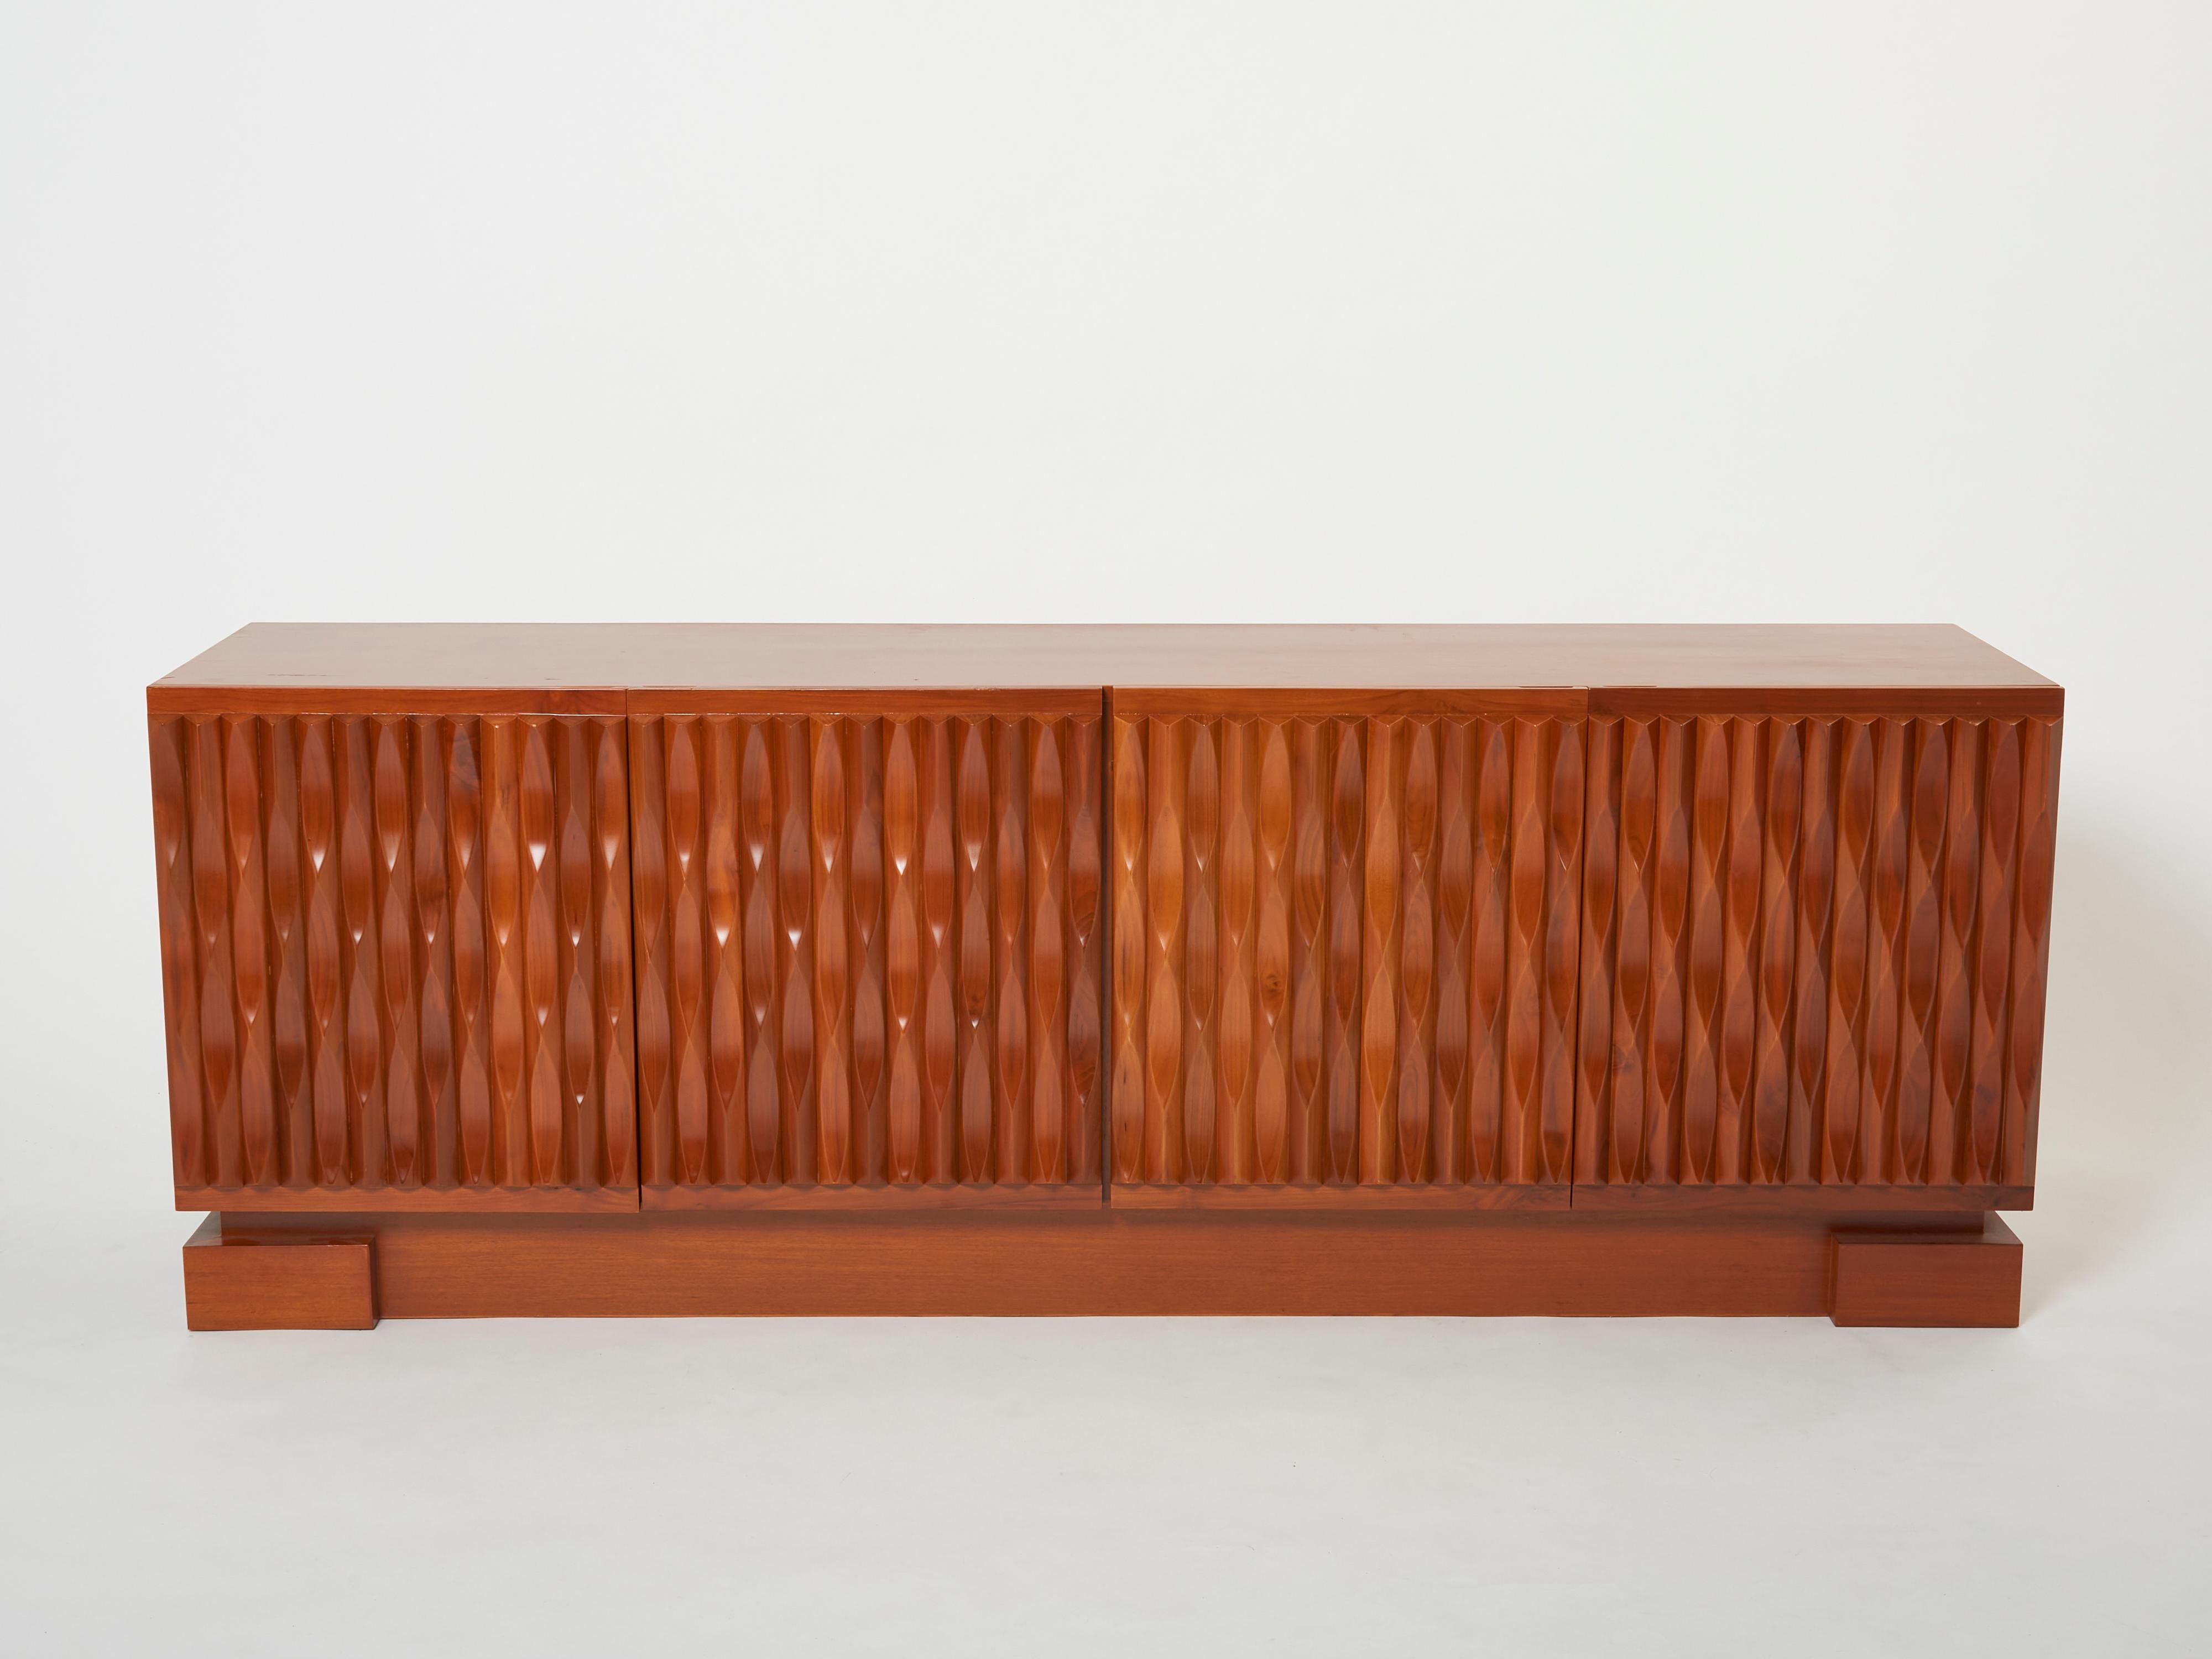 A unique and timeless vintage piece, this mid-century sideboard feels imposing and architectural, with straight lines and geometric patterns. Made from solid Mahogany by De Coene in Belgium in the late 1970s, it features four graphic carved doors